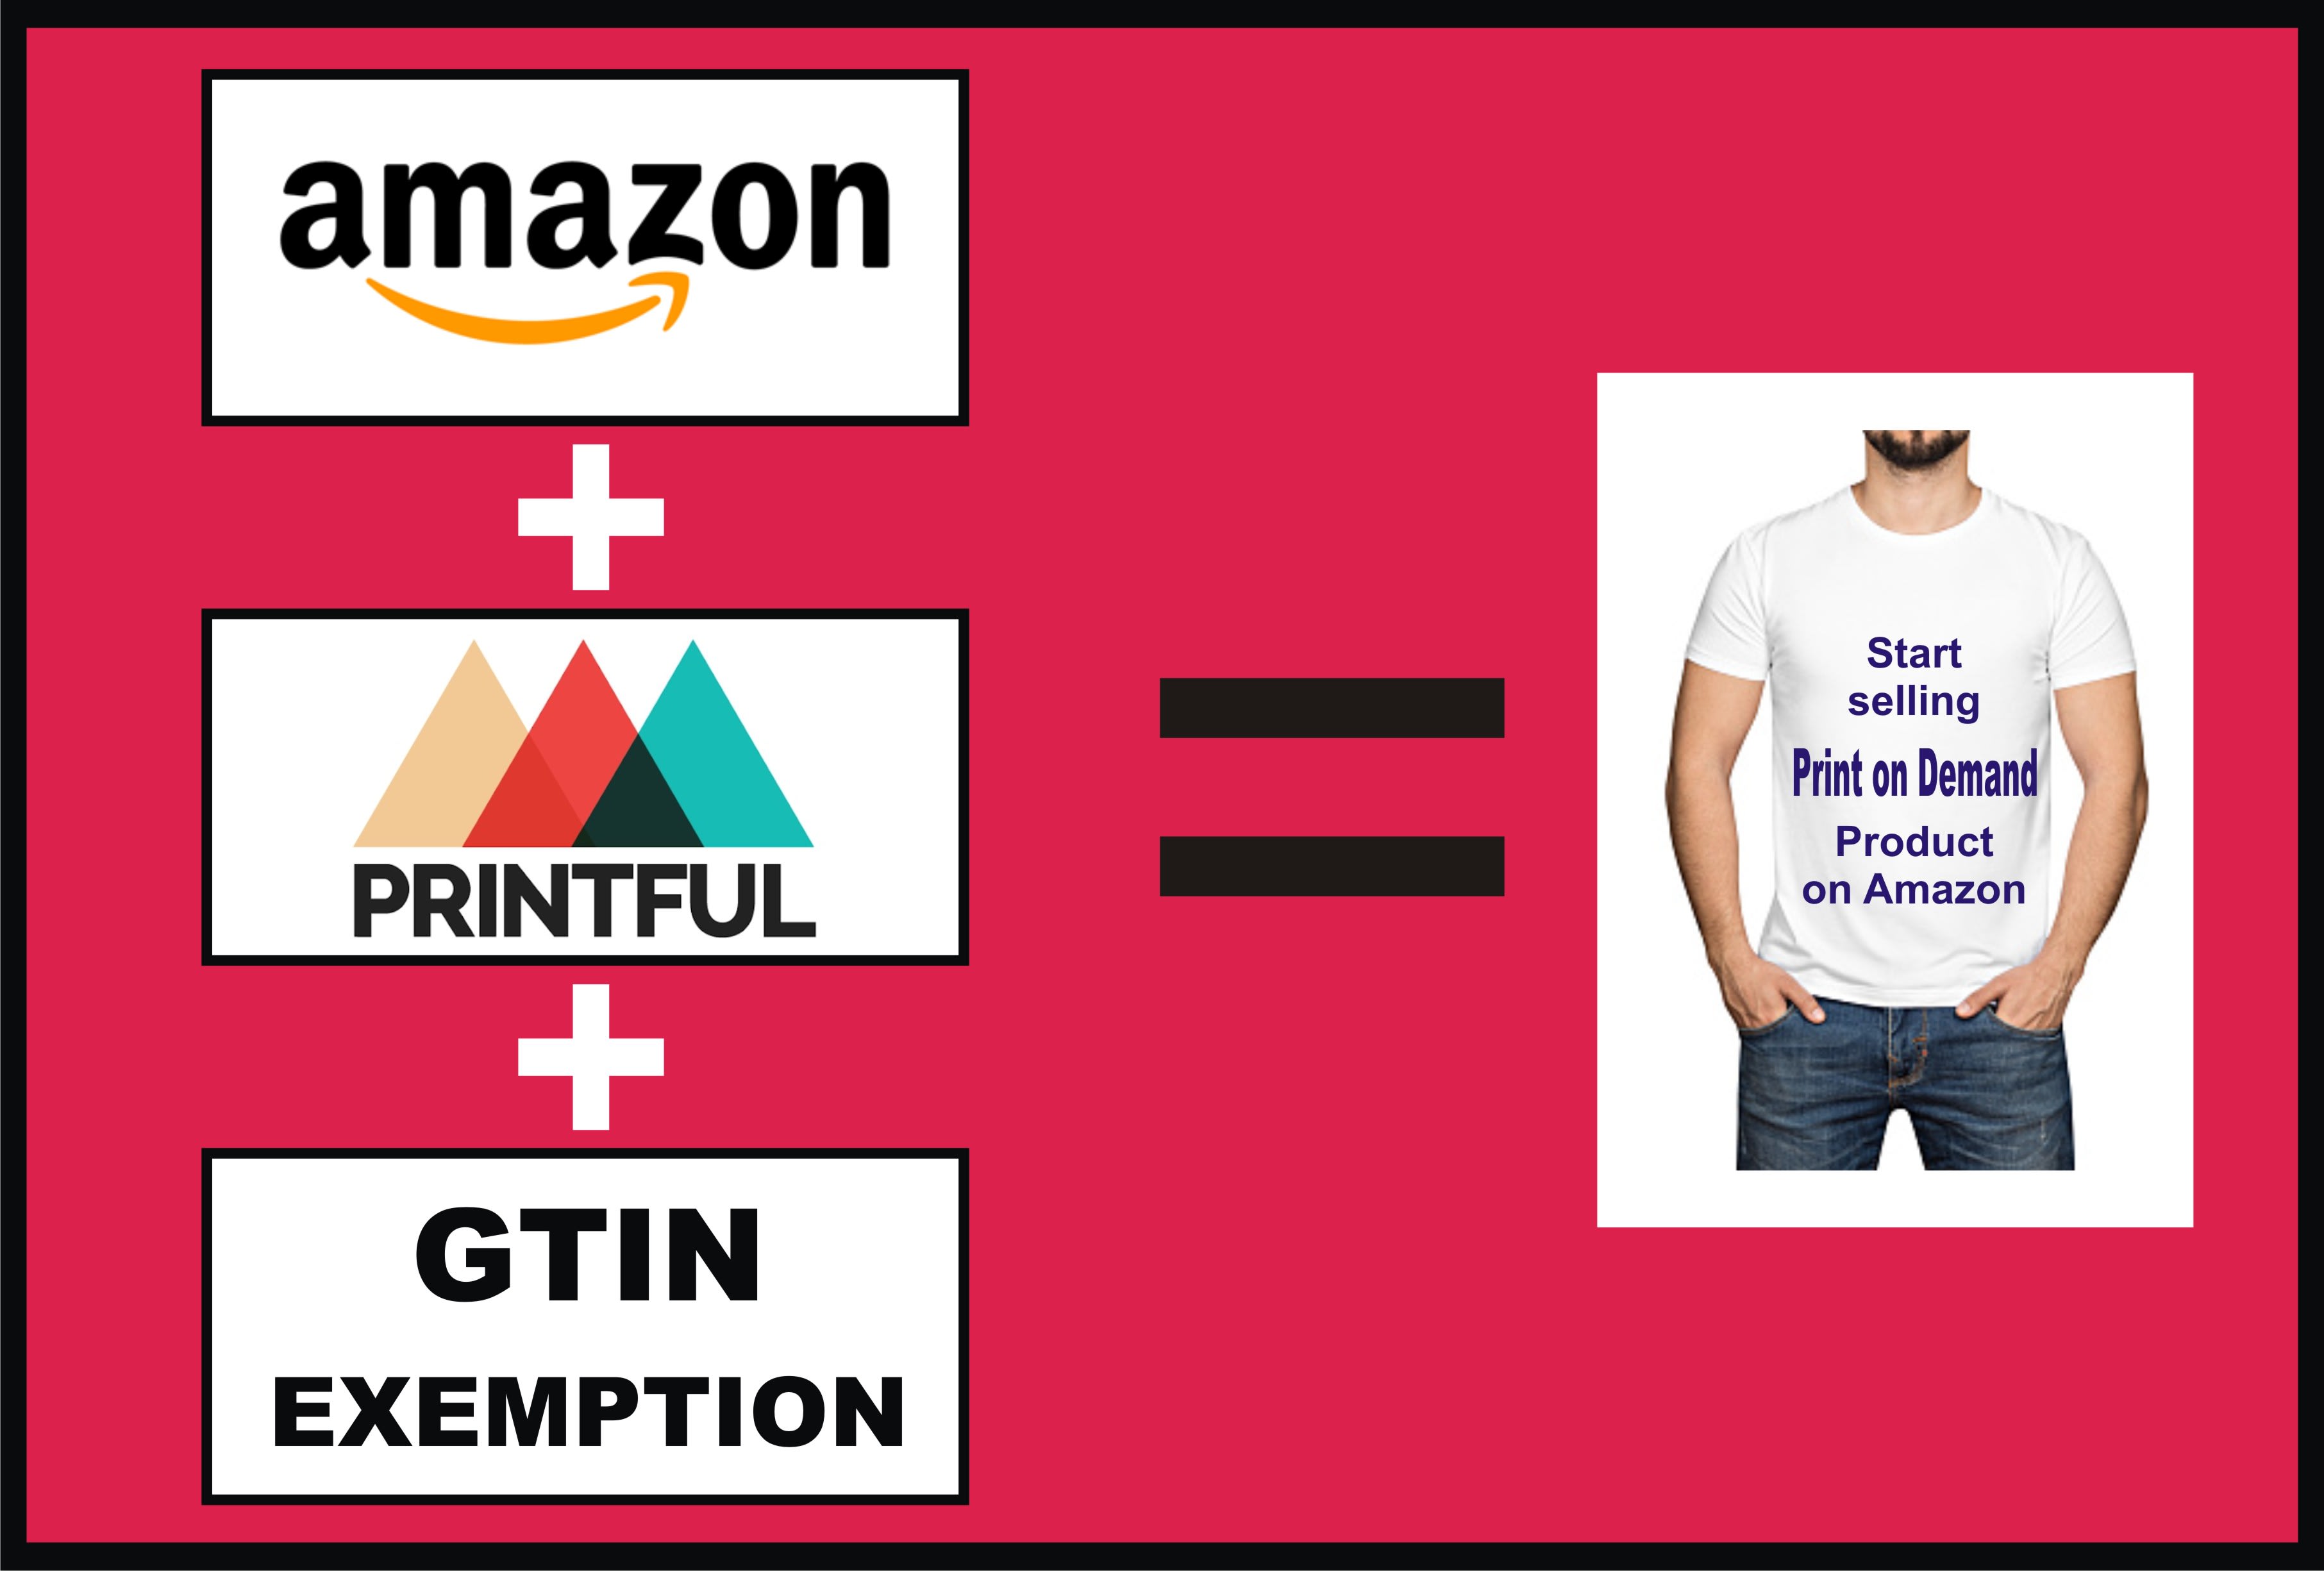 eksplosion farvning Lokomotiv Approved category for gtin exemption to sell print on demand products on  amazon by Aamir1996 | Fiverr